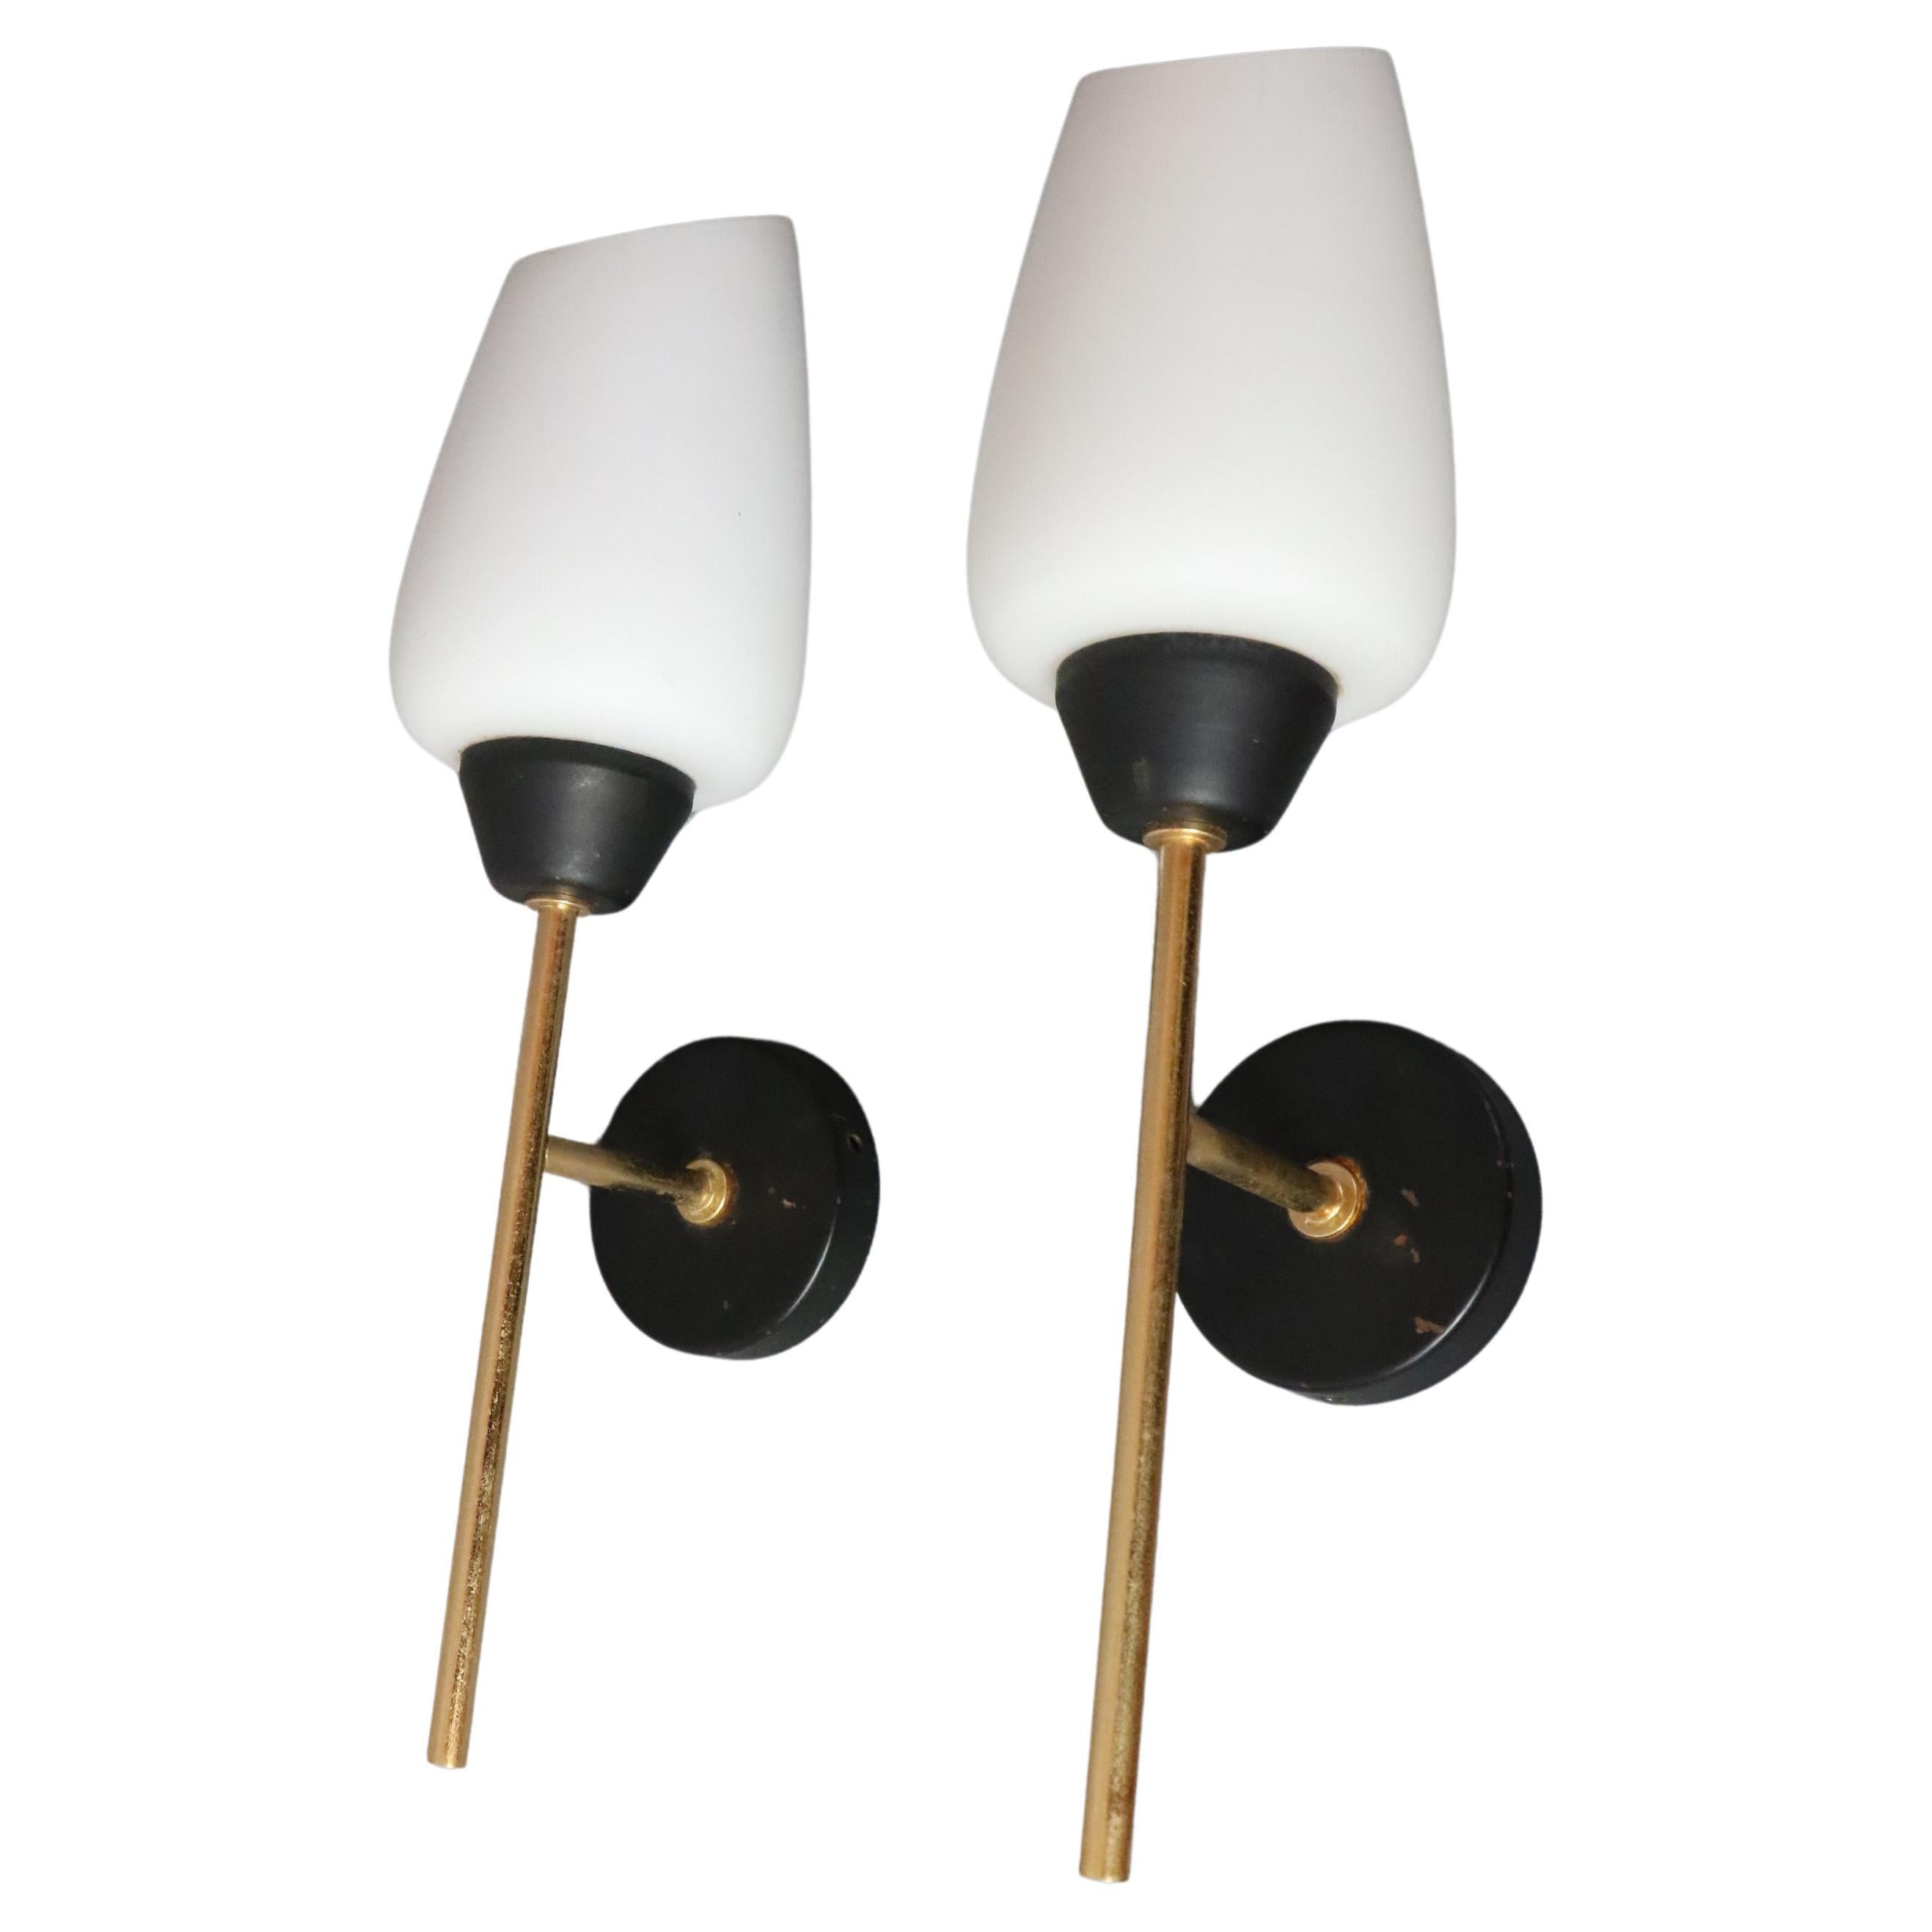 Maison Lunel - Pair of Mid-Century Modern Wall lights - 1950s France For Sale